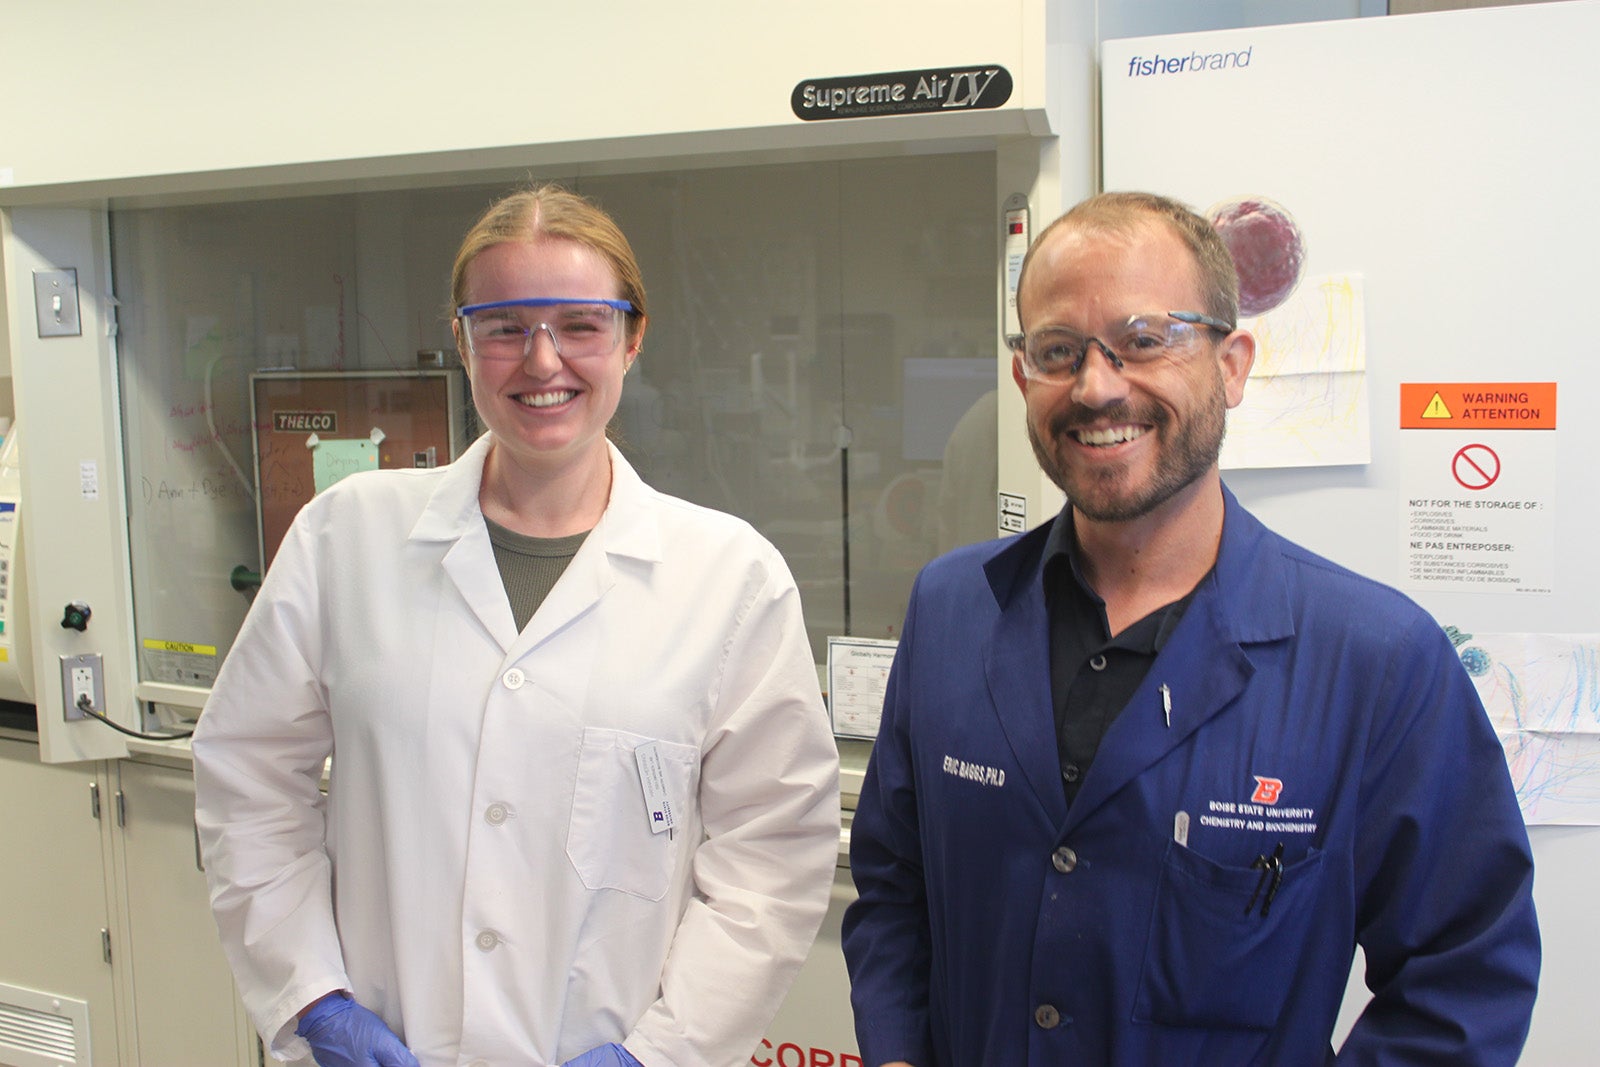 A chemistry professor and student posing for a photo in lab coats